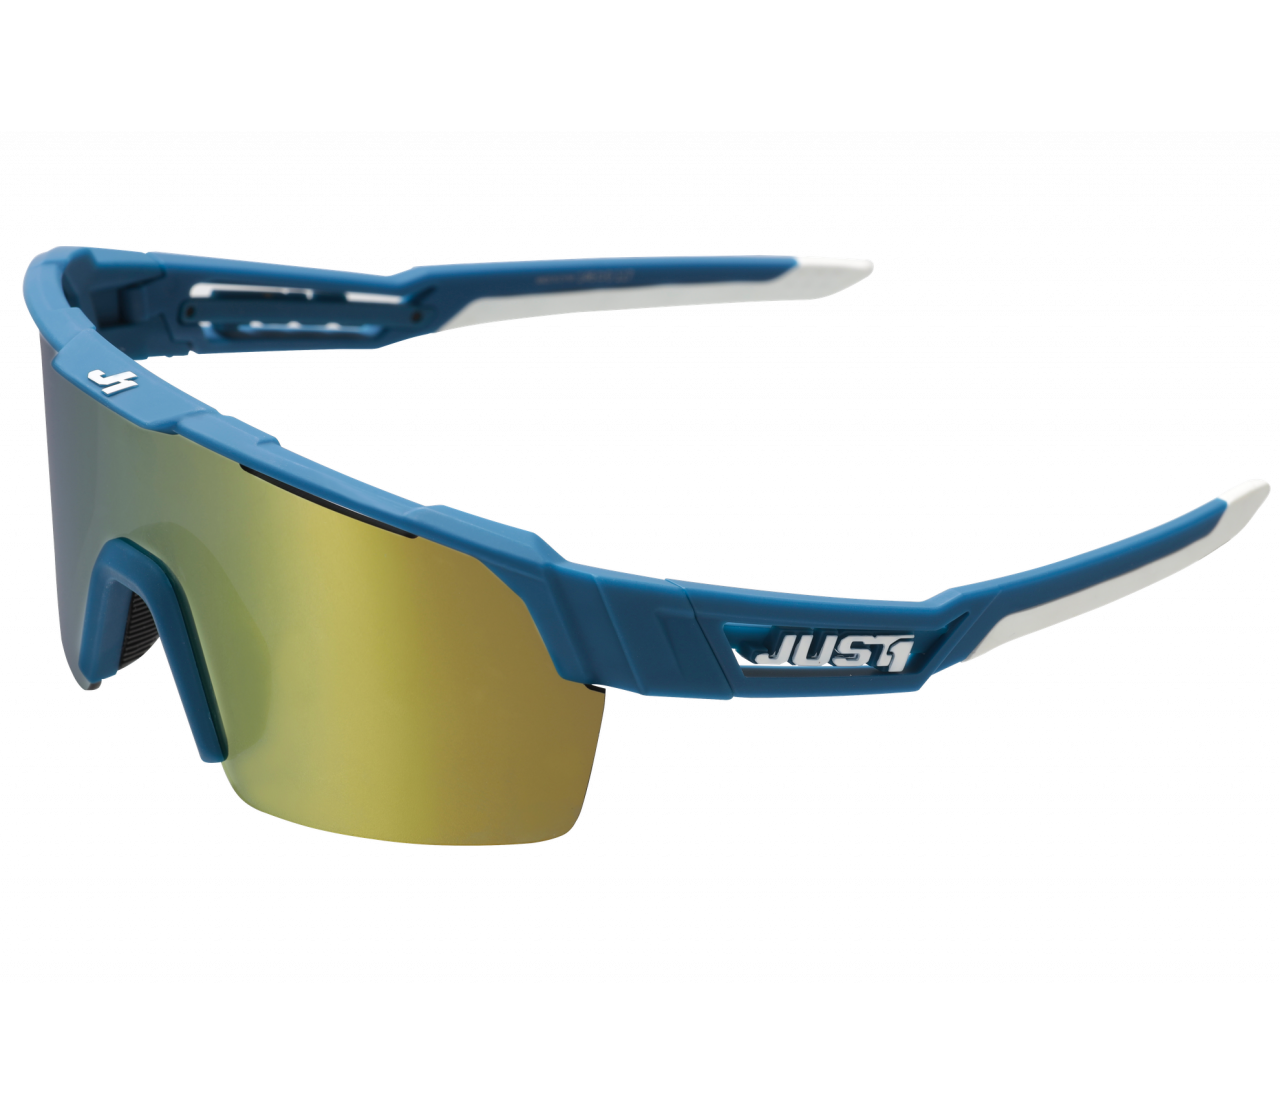 JUST1 SNIPER URBAN BLUE-WHITE with clear yellow lens